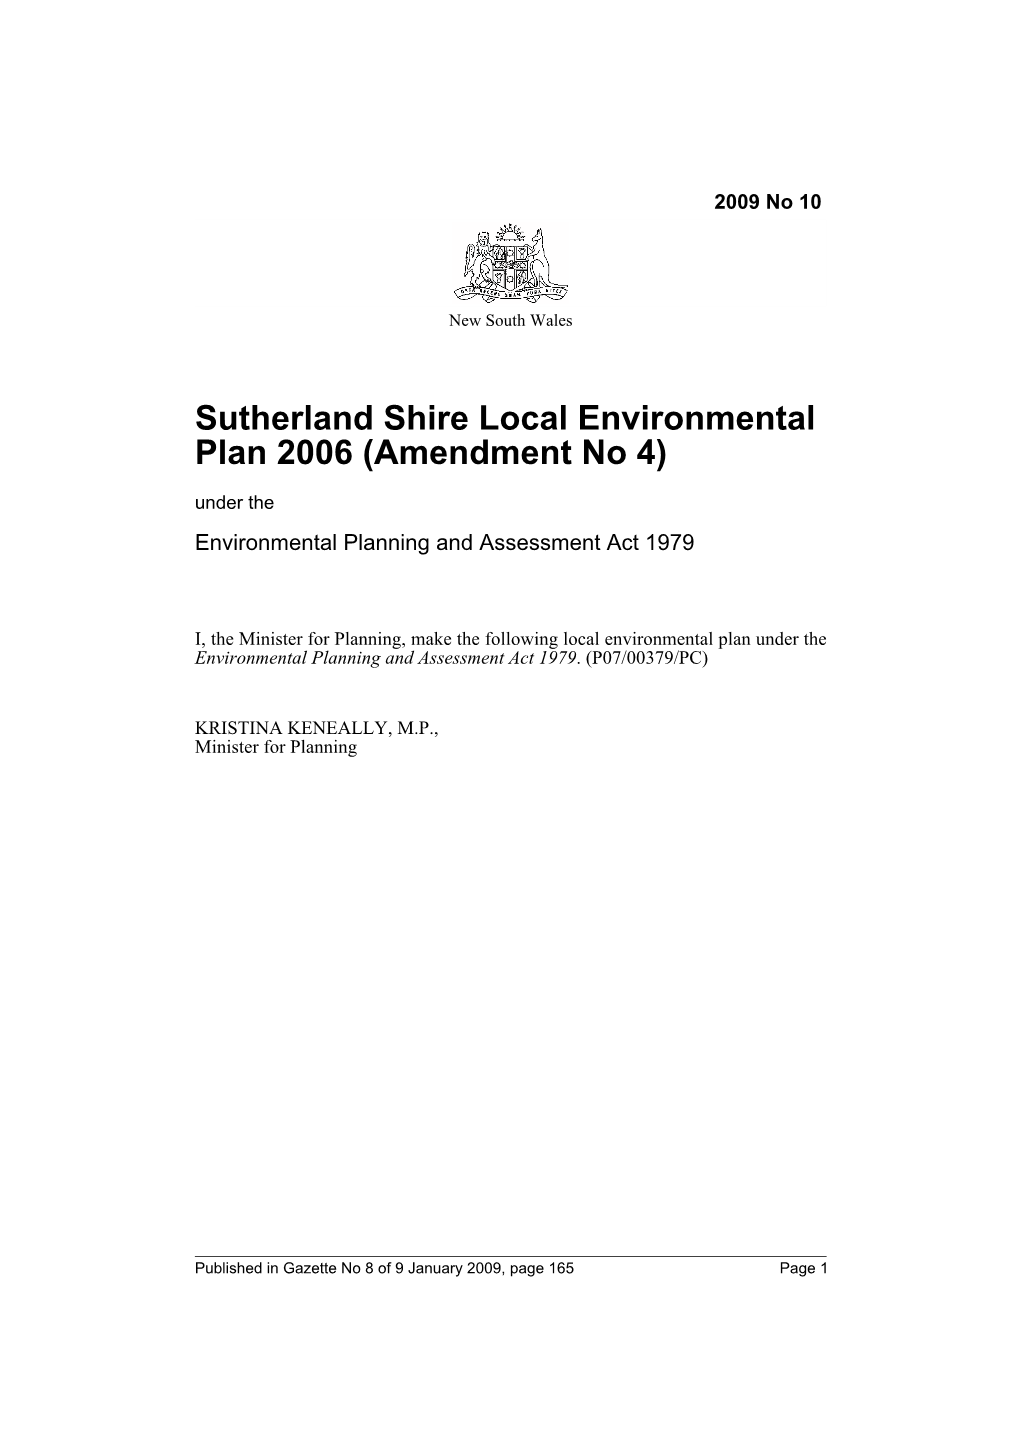 Sutherland Shire Local Environmental Plan 2006 (Amendment No 4) Under the Environmental Planning and Assessment Act 1979